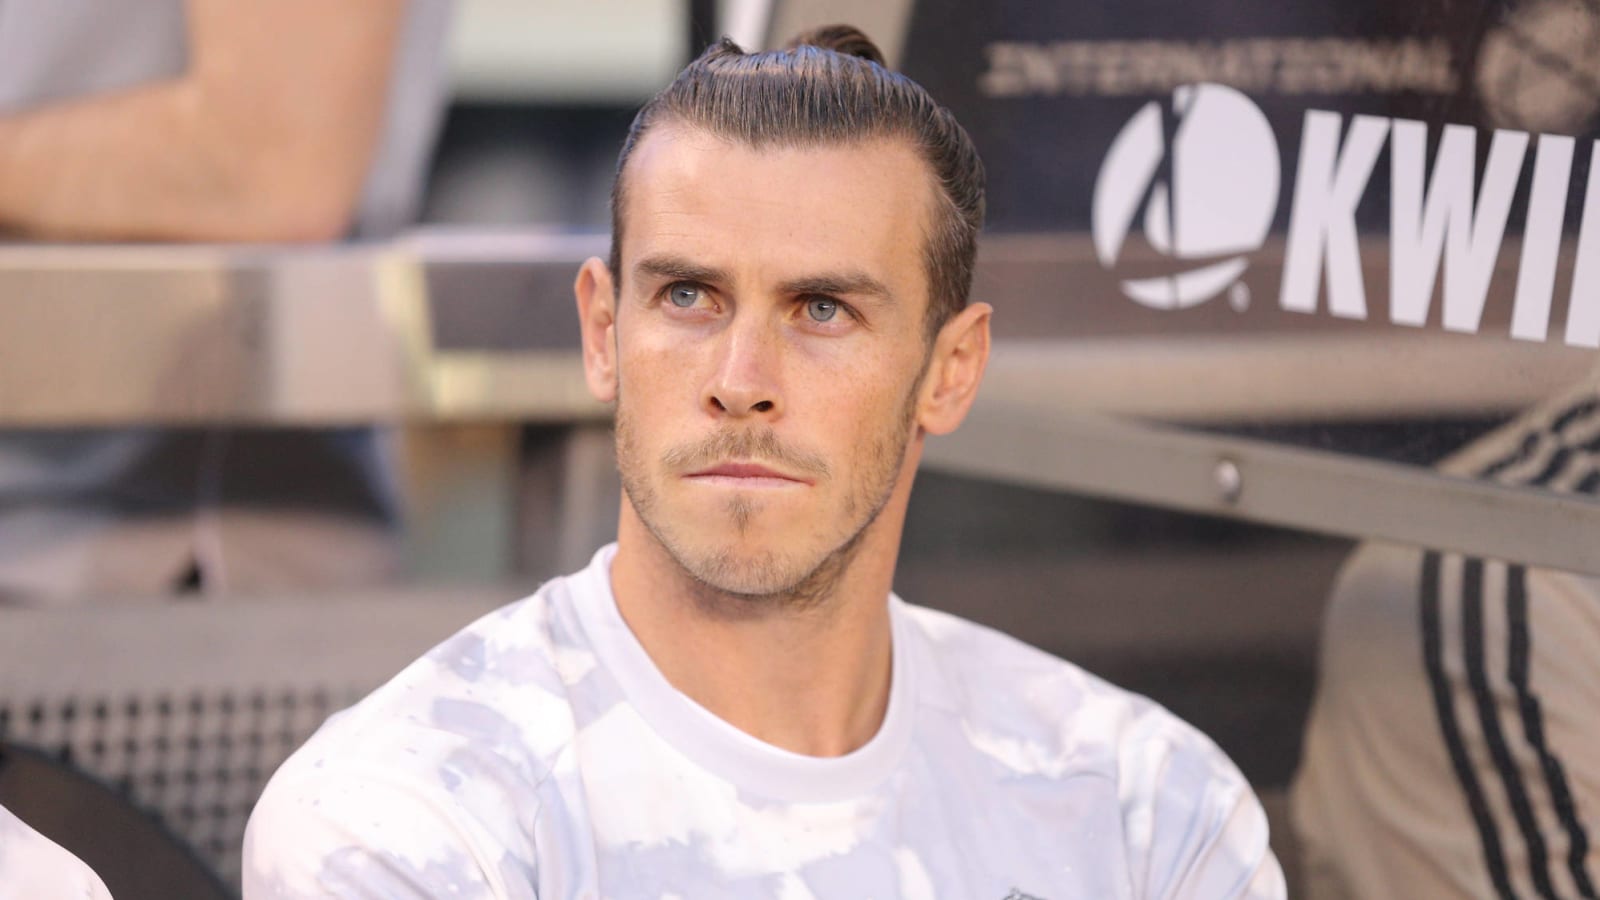 Real Madrid star Gareth Bale defends golf habit, likens himself to Stephen Curry 